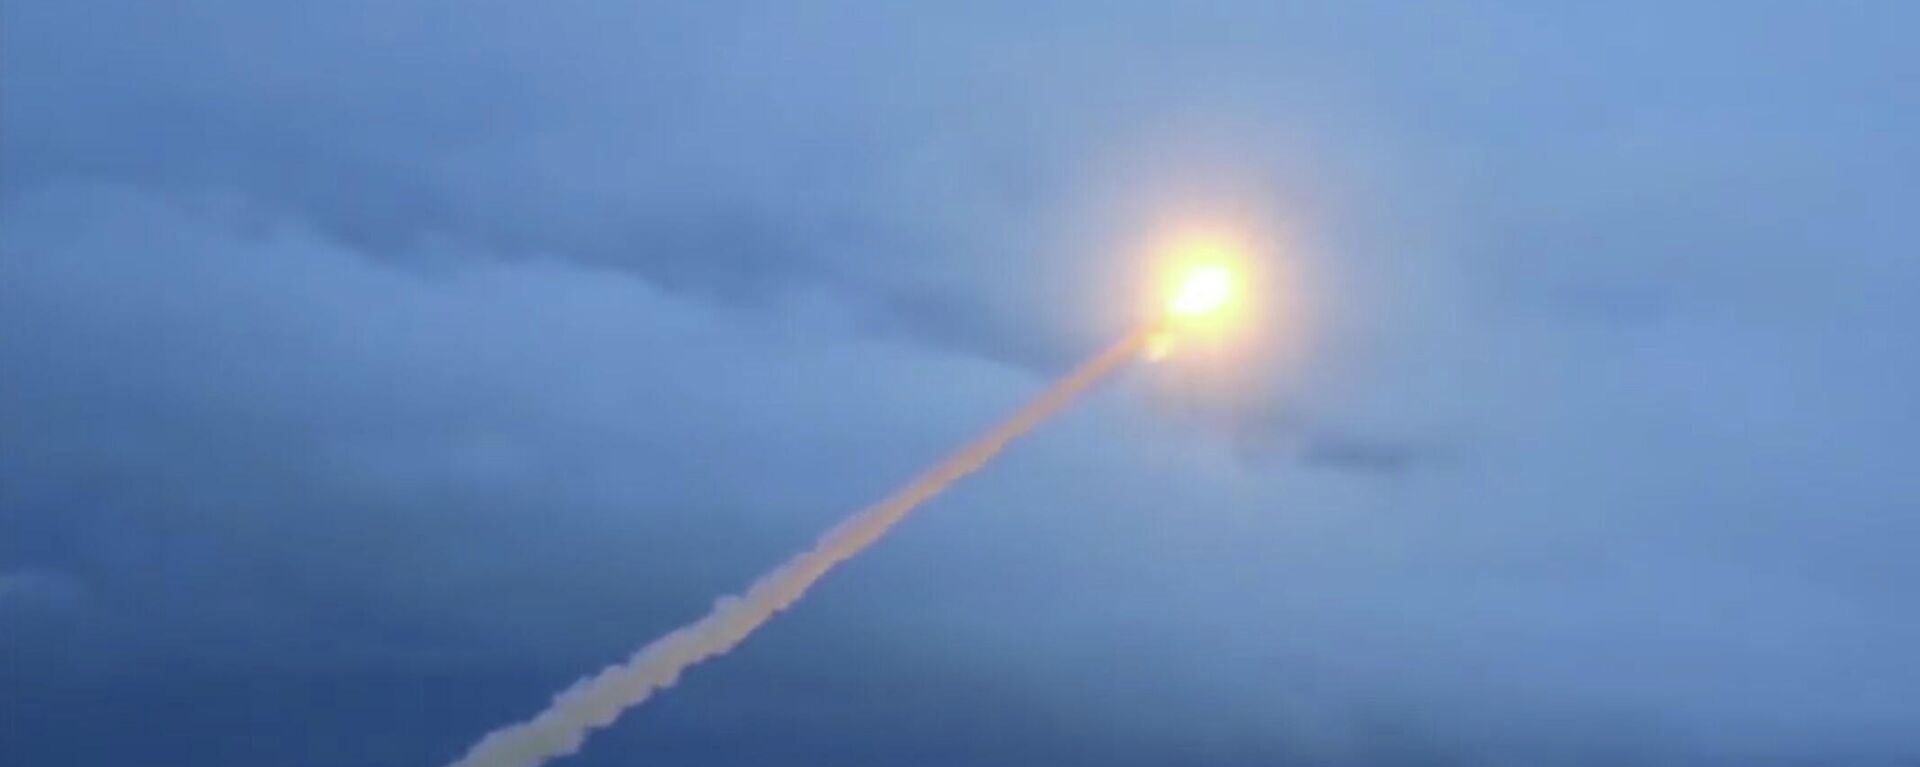 Trial launch of Russian cruise missile with nuclear powered engine  9M730 Burevestnik (NATO reporting name: SSC-X-9 Skyfall) - Sputnik International, 1920, 07.12.2022